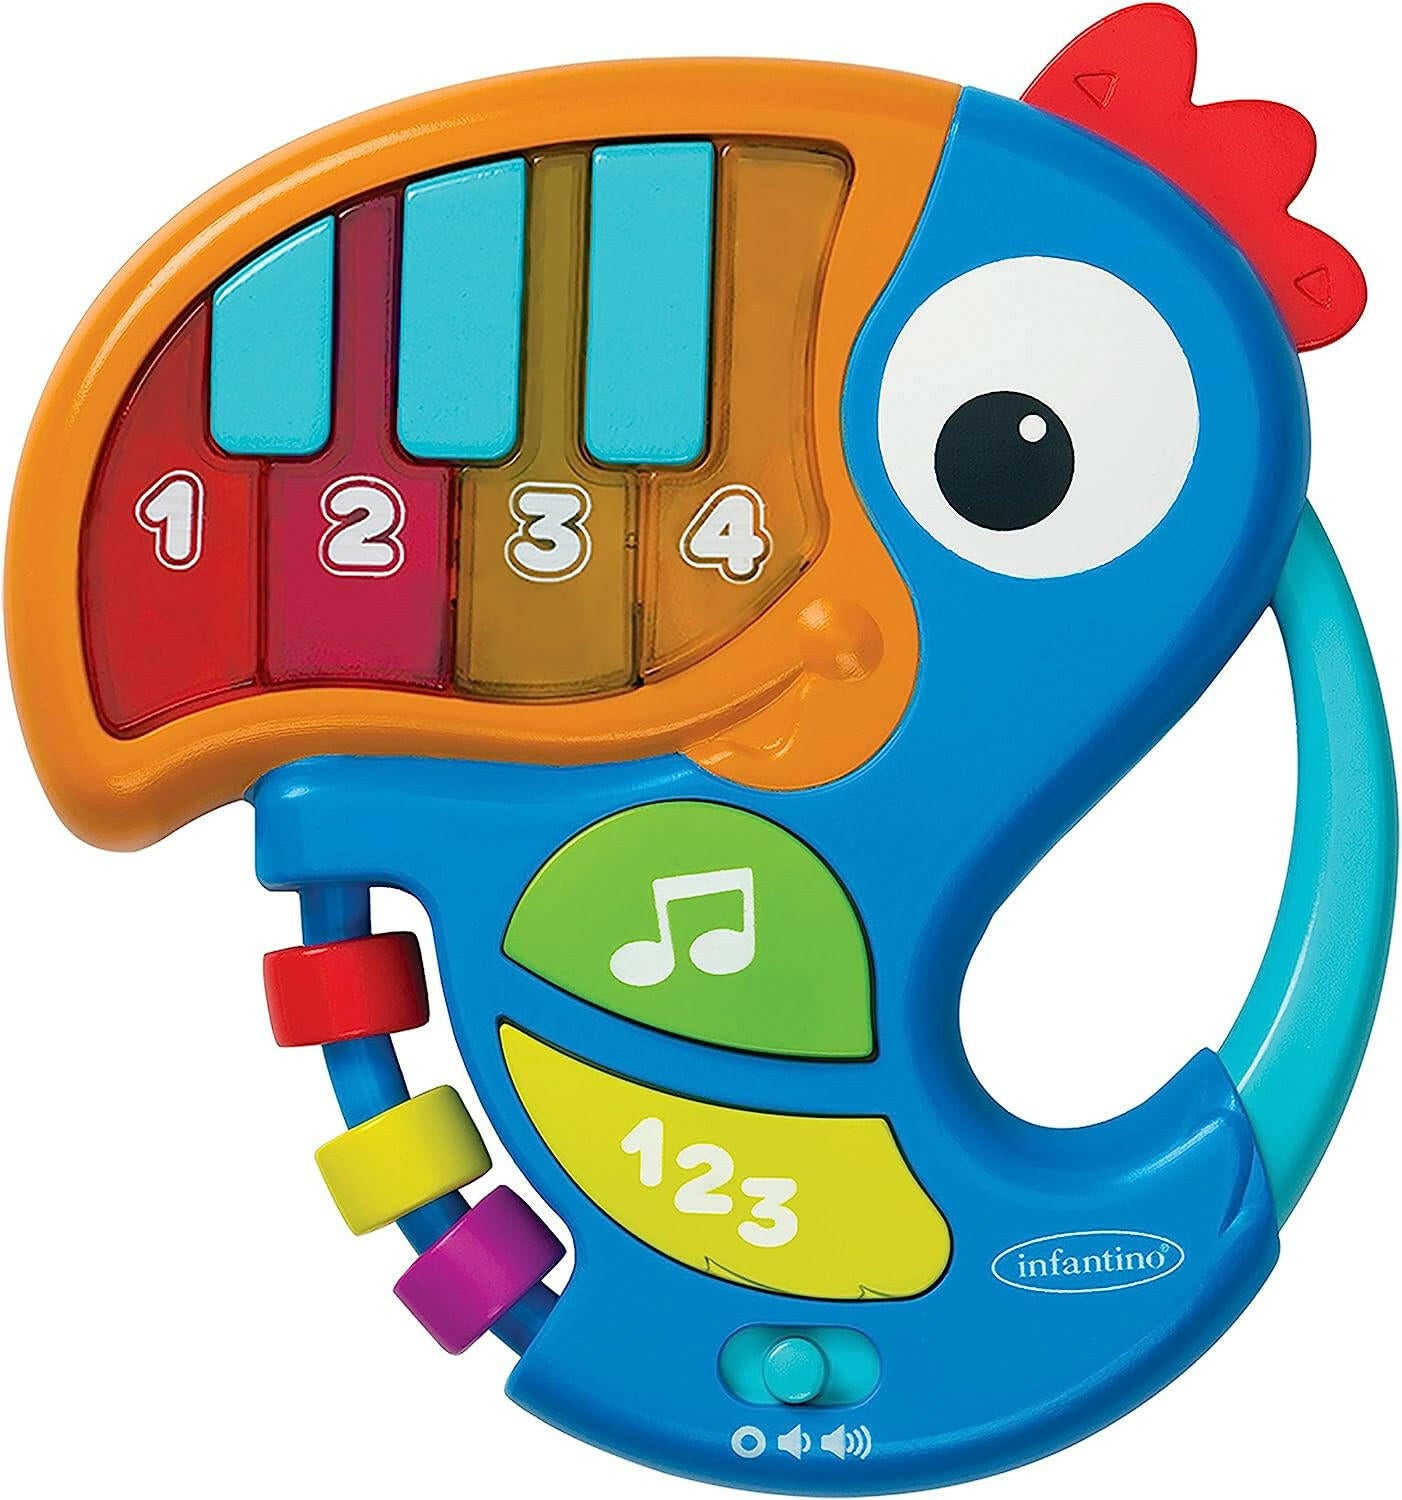 Infantino Piano & Numbers Learning Toucan - Light-Up Piano Keys and Numbers, Songs, Words, Phrases and Sound Effects, Easy to Grasp and Handle, for Babies and Toddlers.